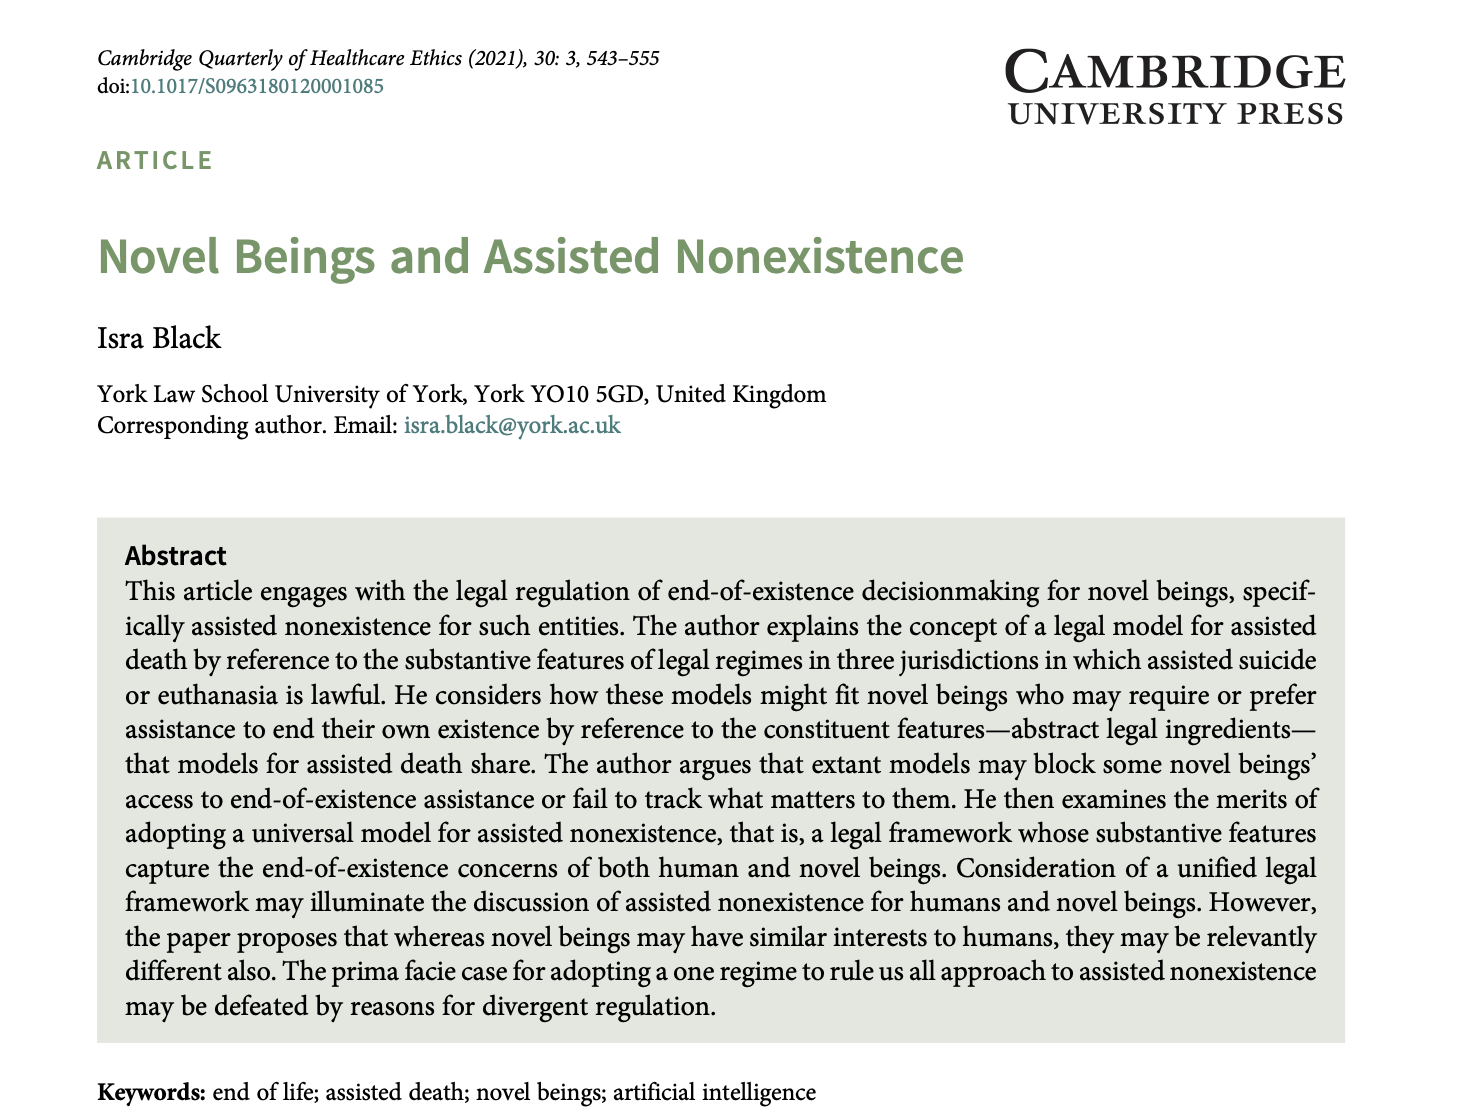 novel beings and assisted nonexistence